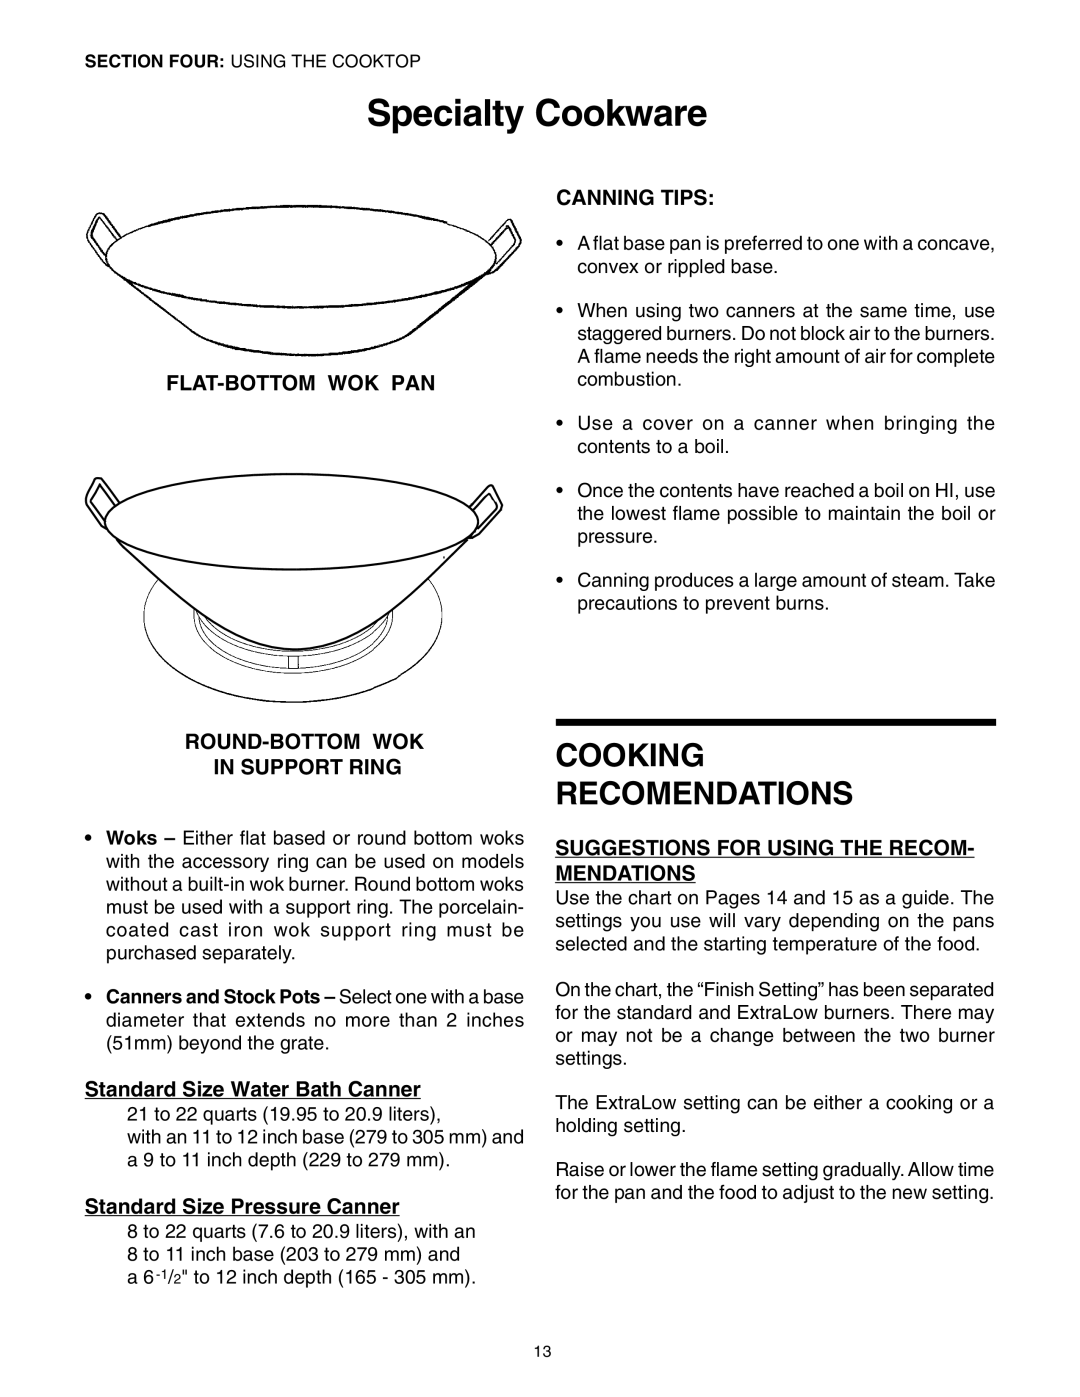 Thermador P30 P36 manuel dutilisation Specialty Cookware, Cooking Recomendations, Canning Tips, Flat-Bottom Wok Pan 